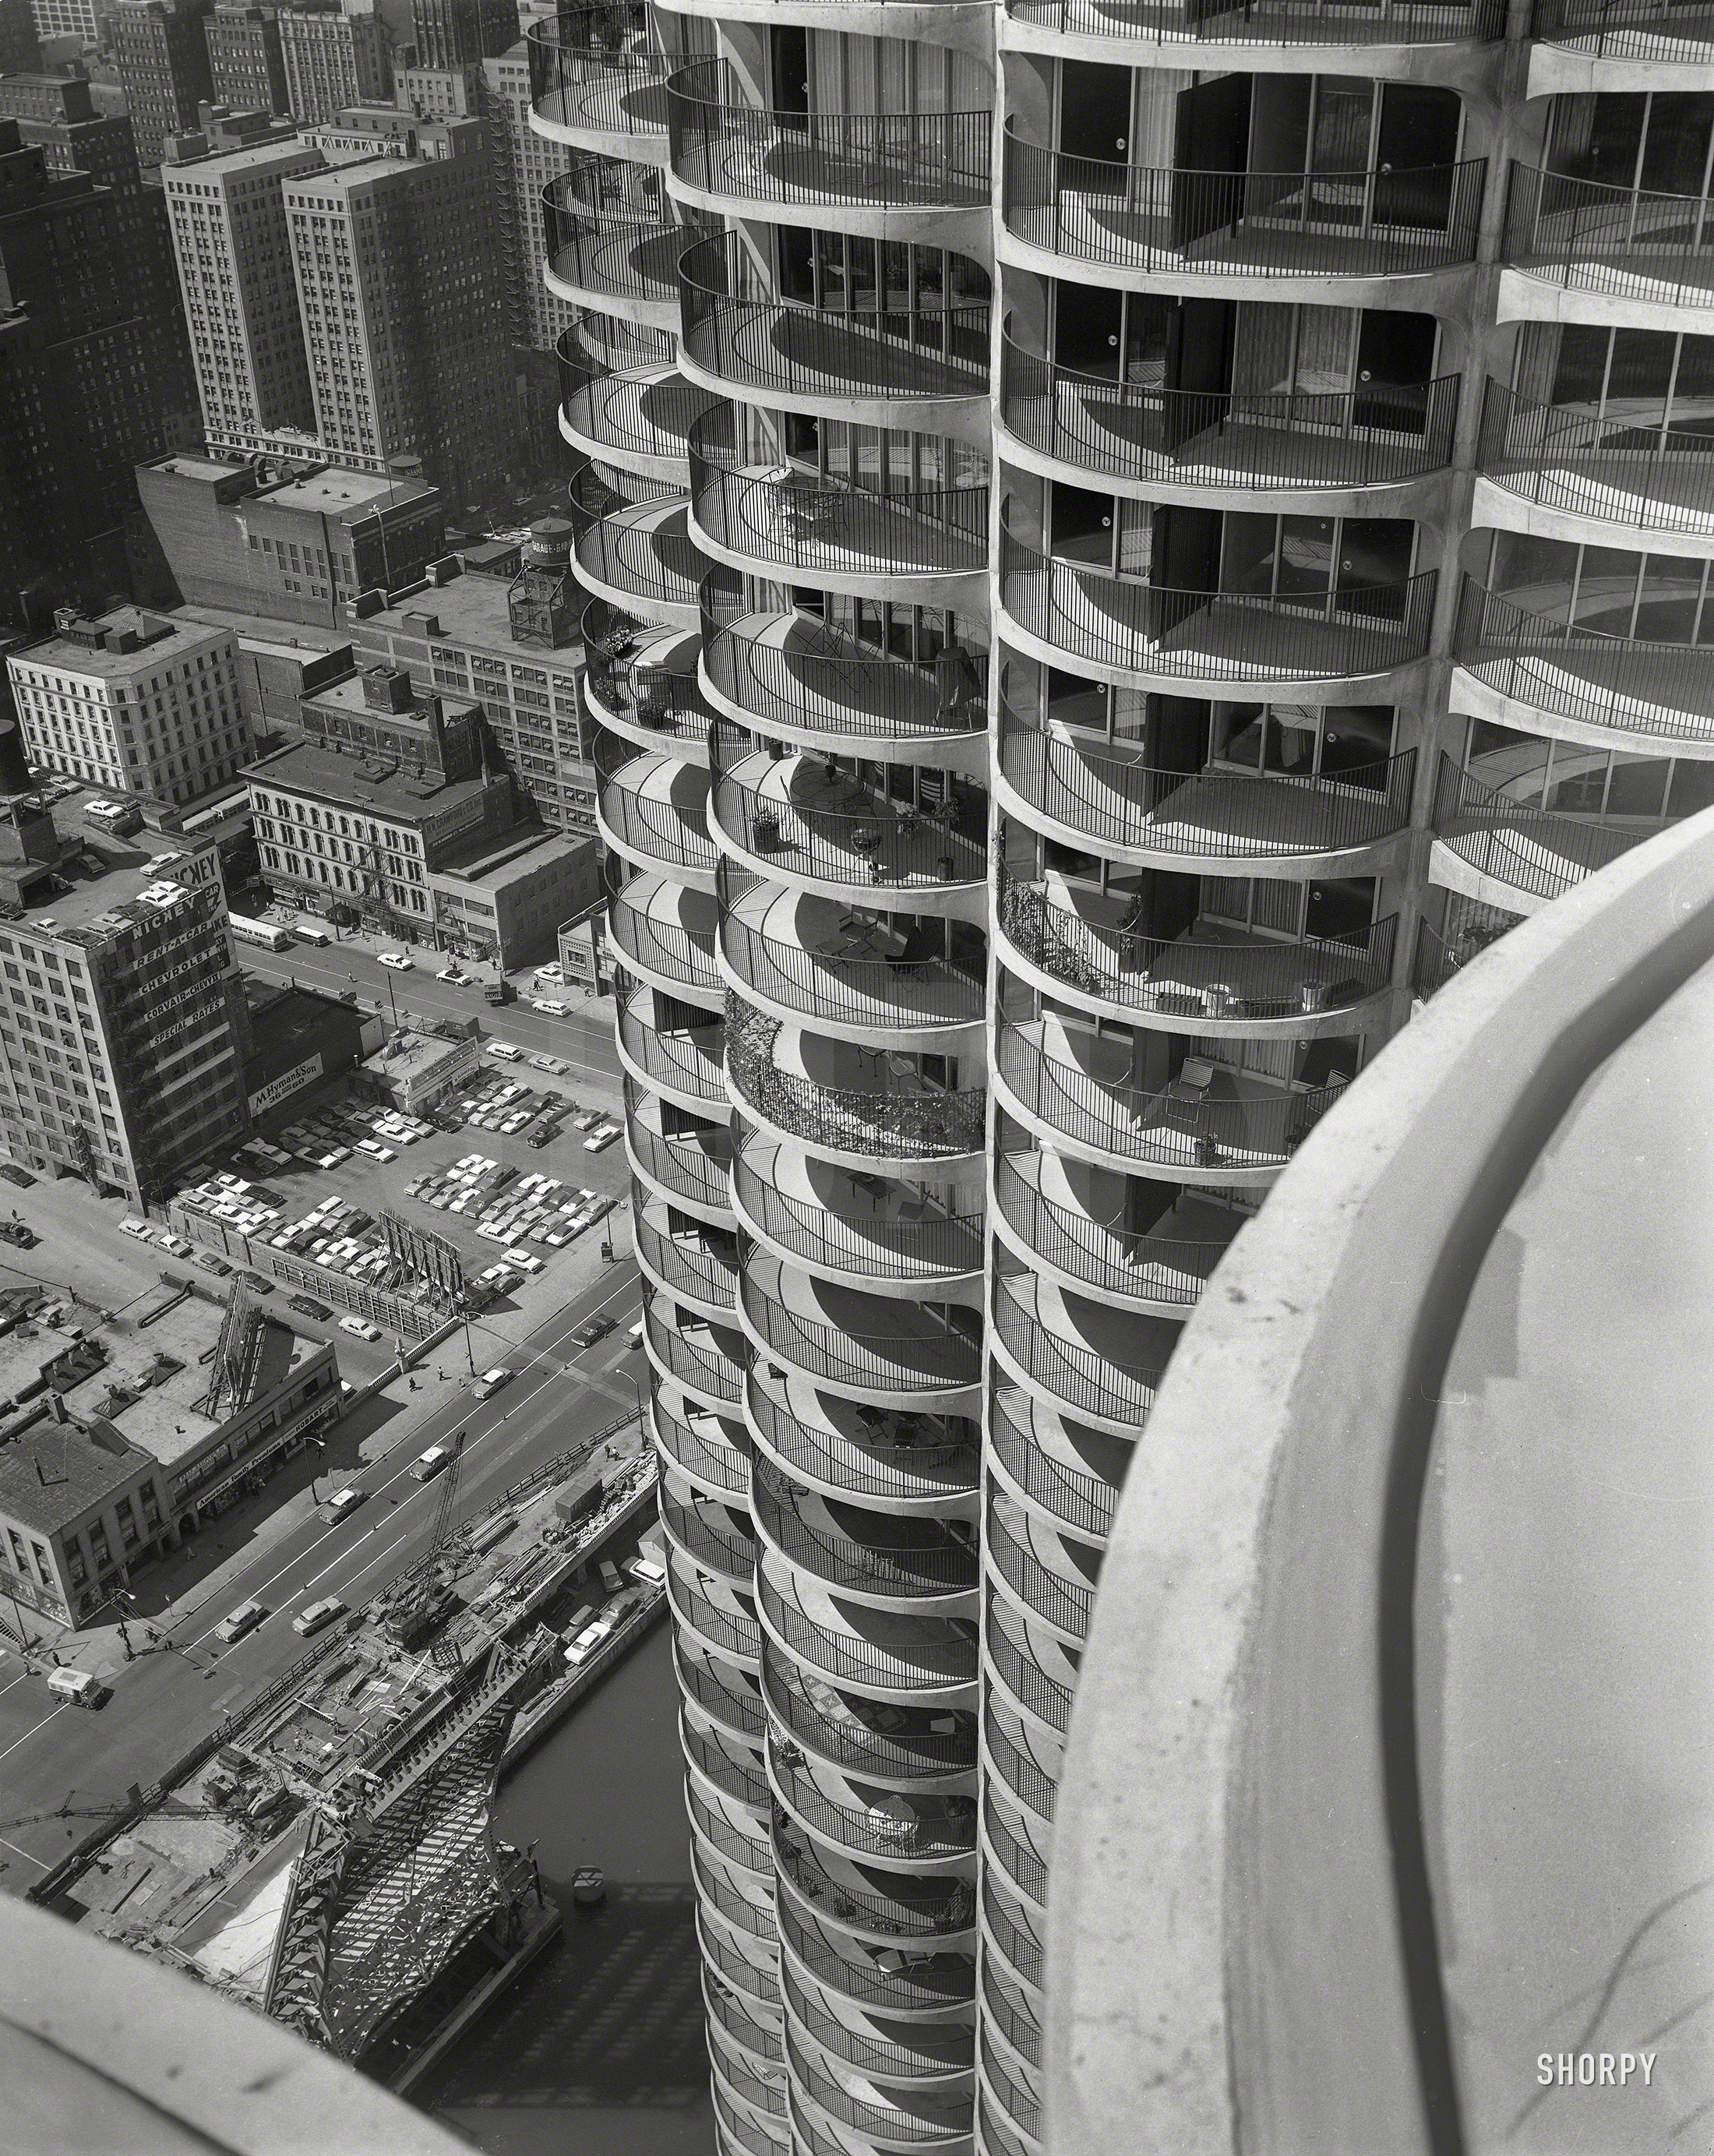 Chicago circa 1964. "Marina City." The high-rise apartment towers on the Chicago River, and a compendium of balcony-decorating ideas. View full size.
